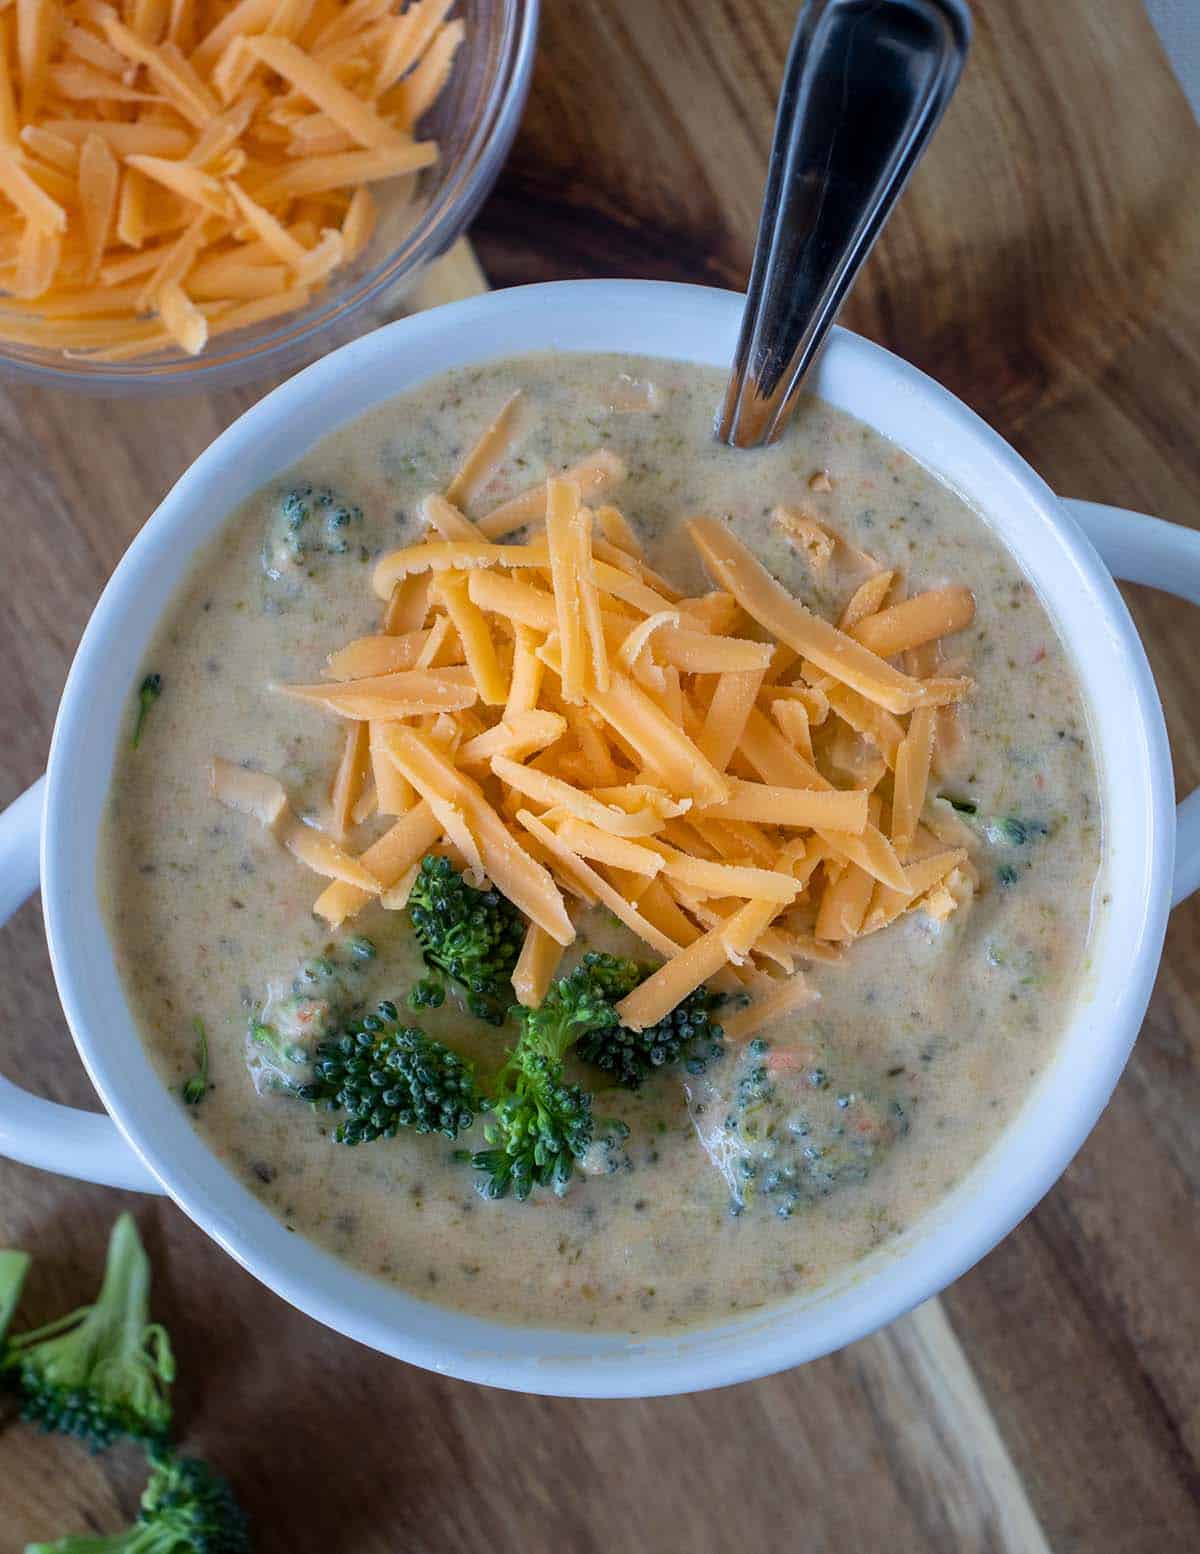 Easy broccoli cheddar soup in a white crock with a silver spoon topped with shredded cheddar cheese and fresh broccoli florets. a bowl of shredded cheddar cheese beside the soup.